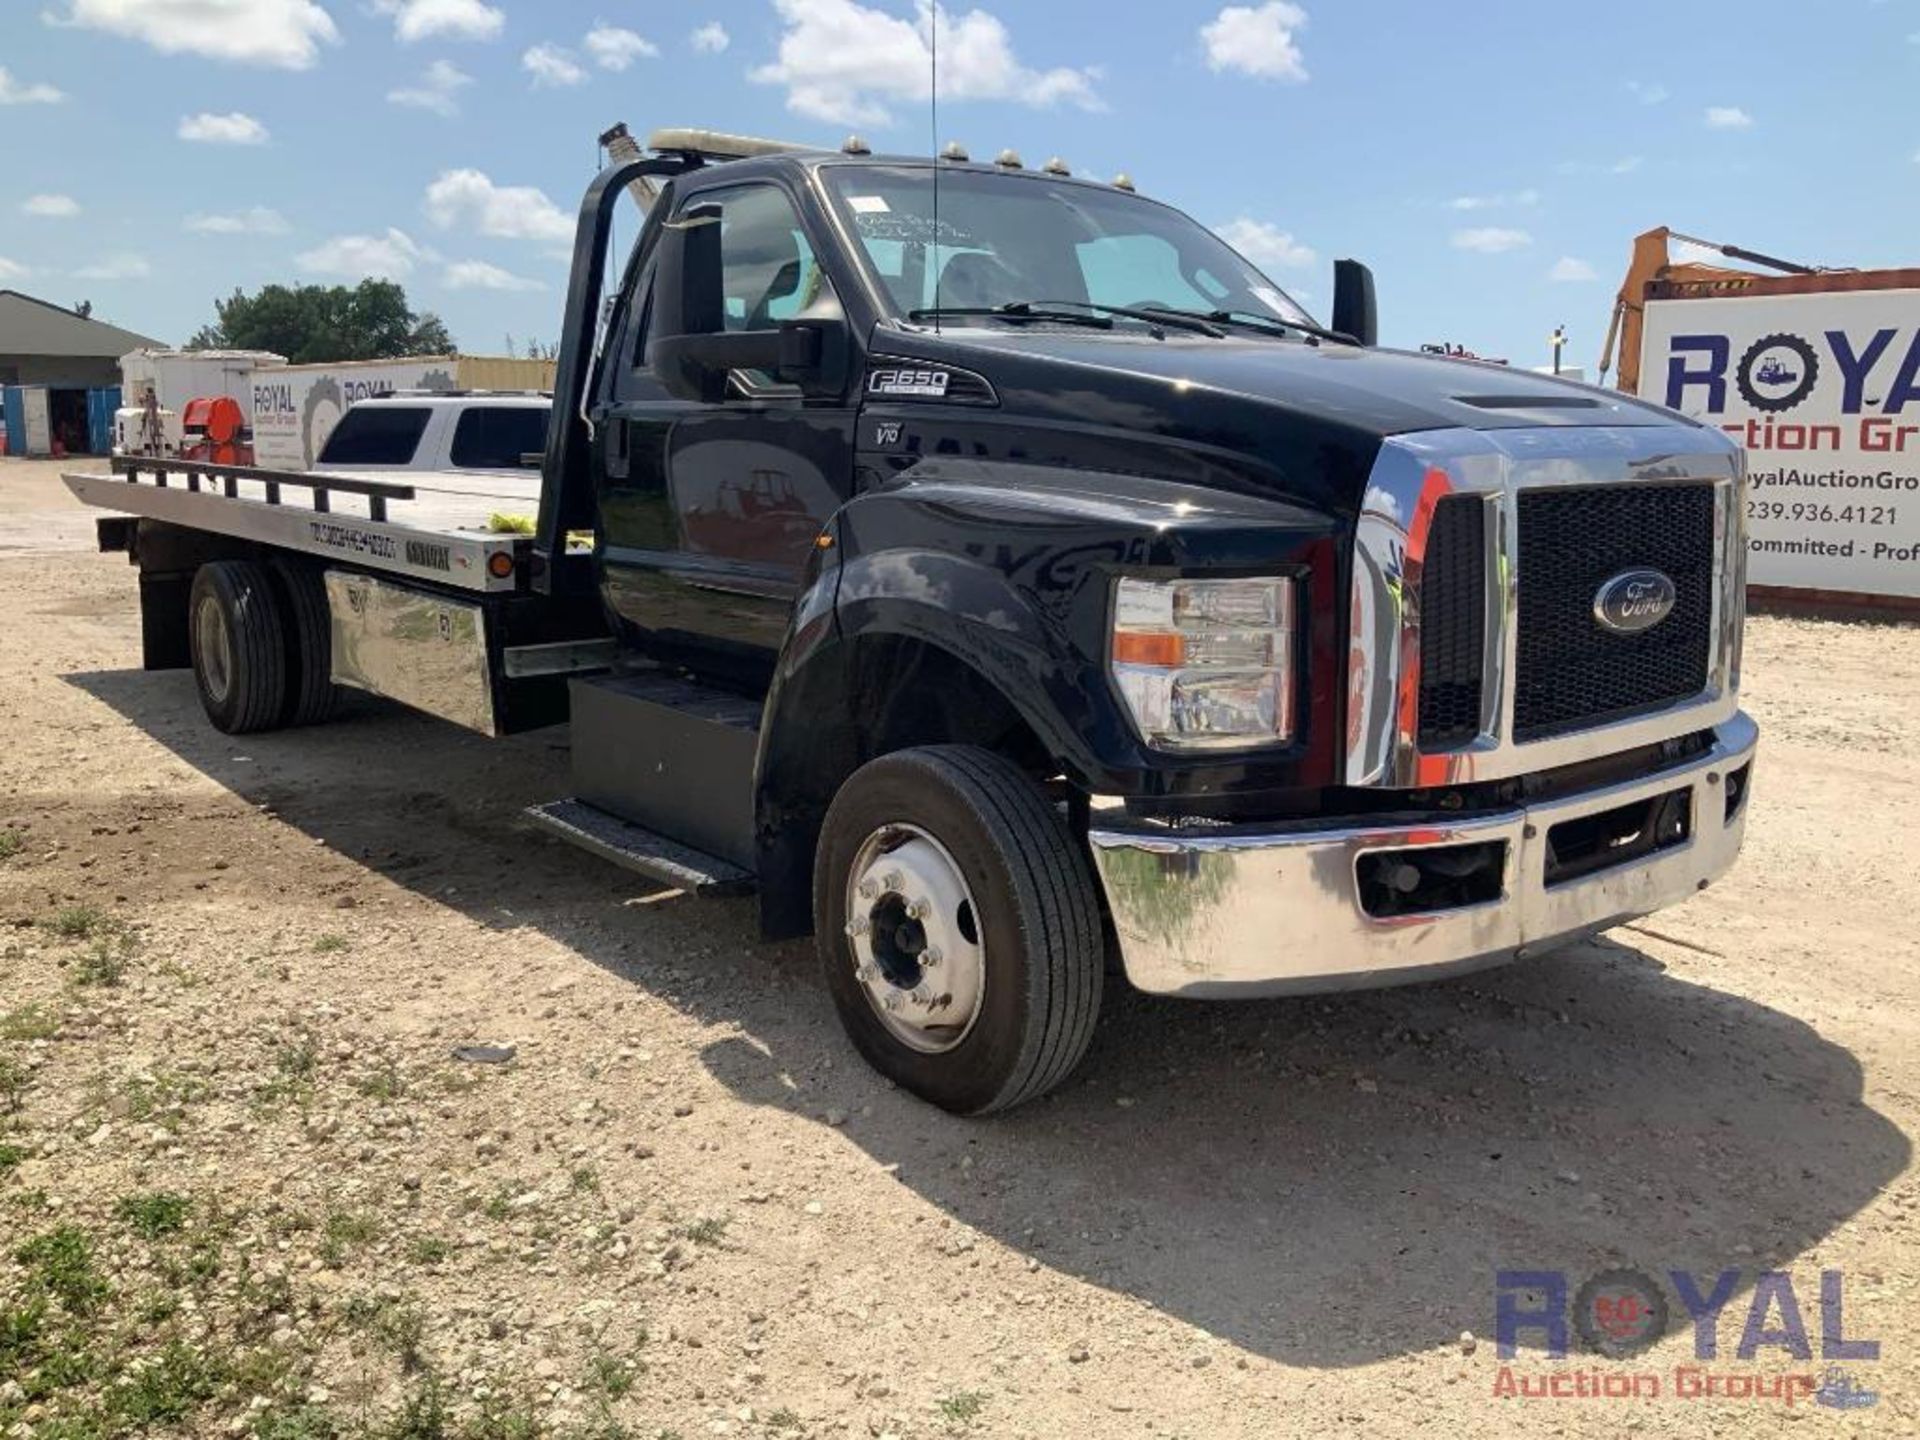 2017 Ford F650 Century Rollback Tow Truck - Image 2 of 33